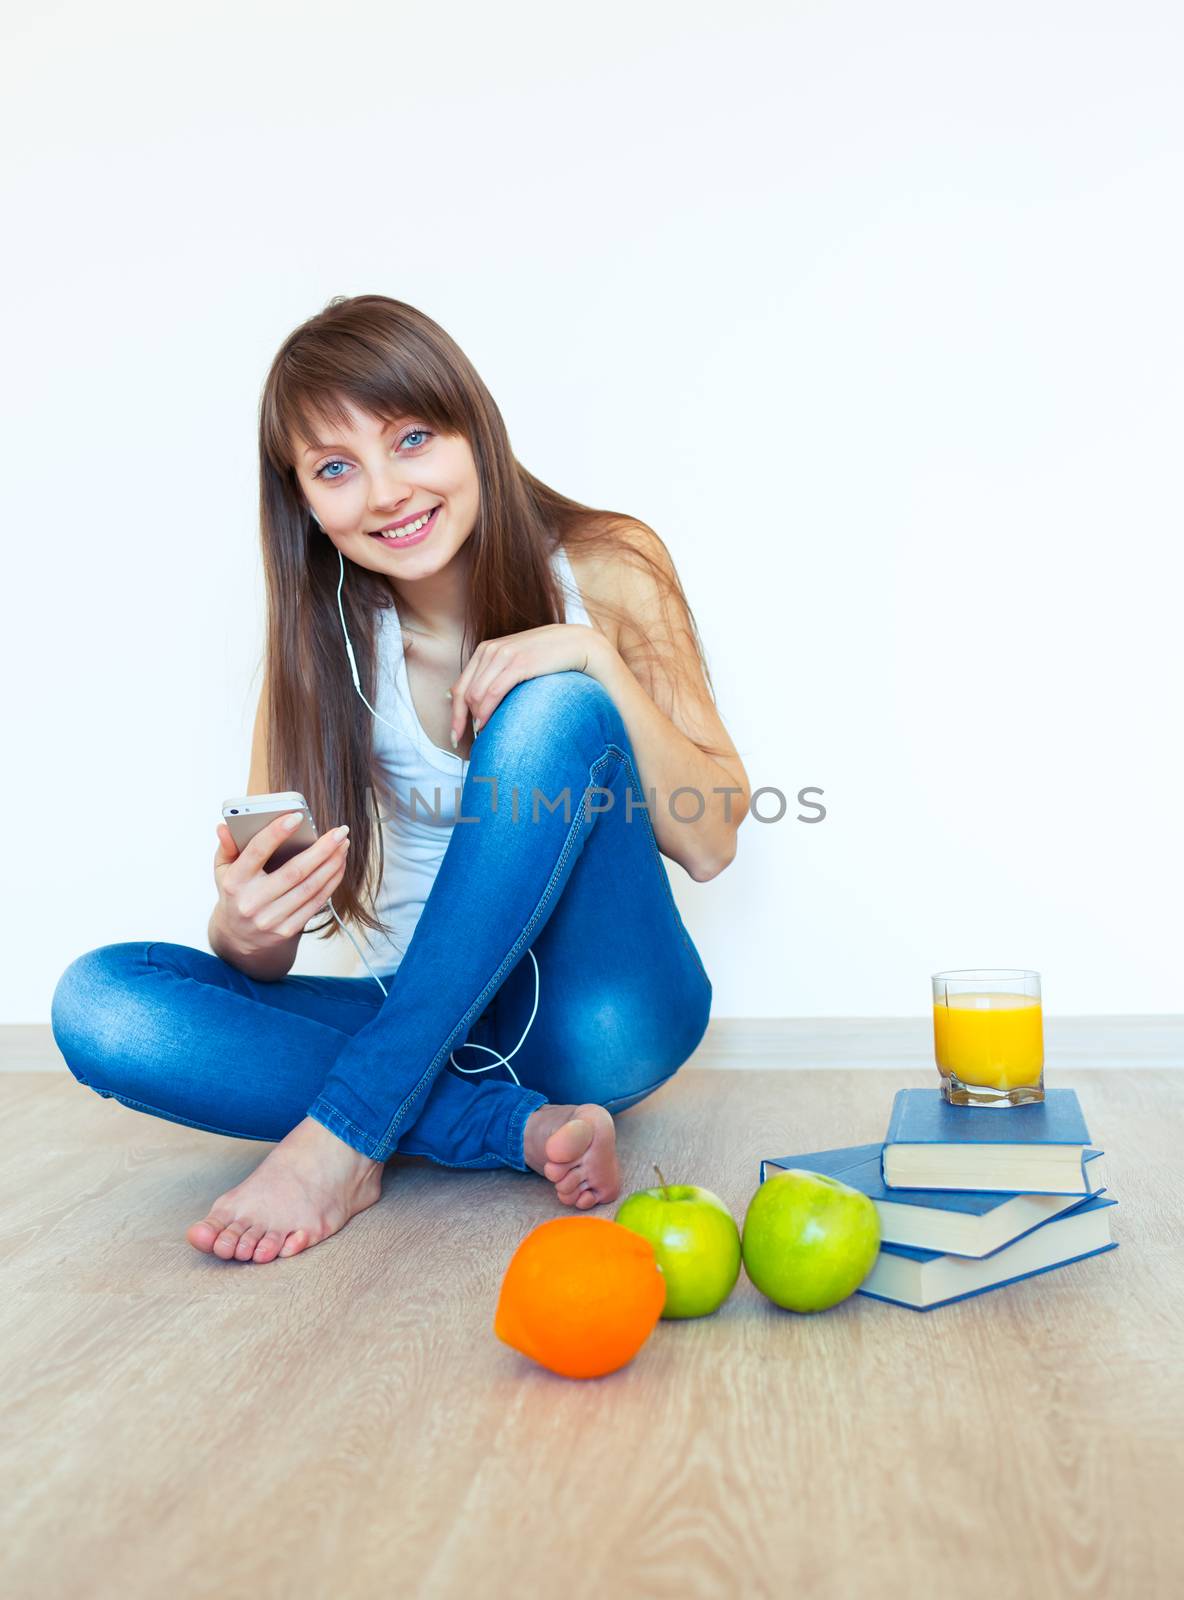 Portrait of a young girl with headphones and green apple listening music at home